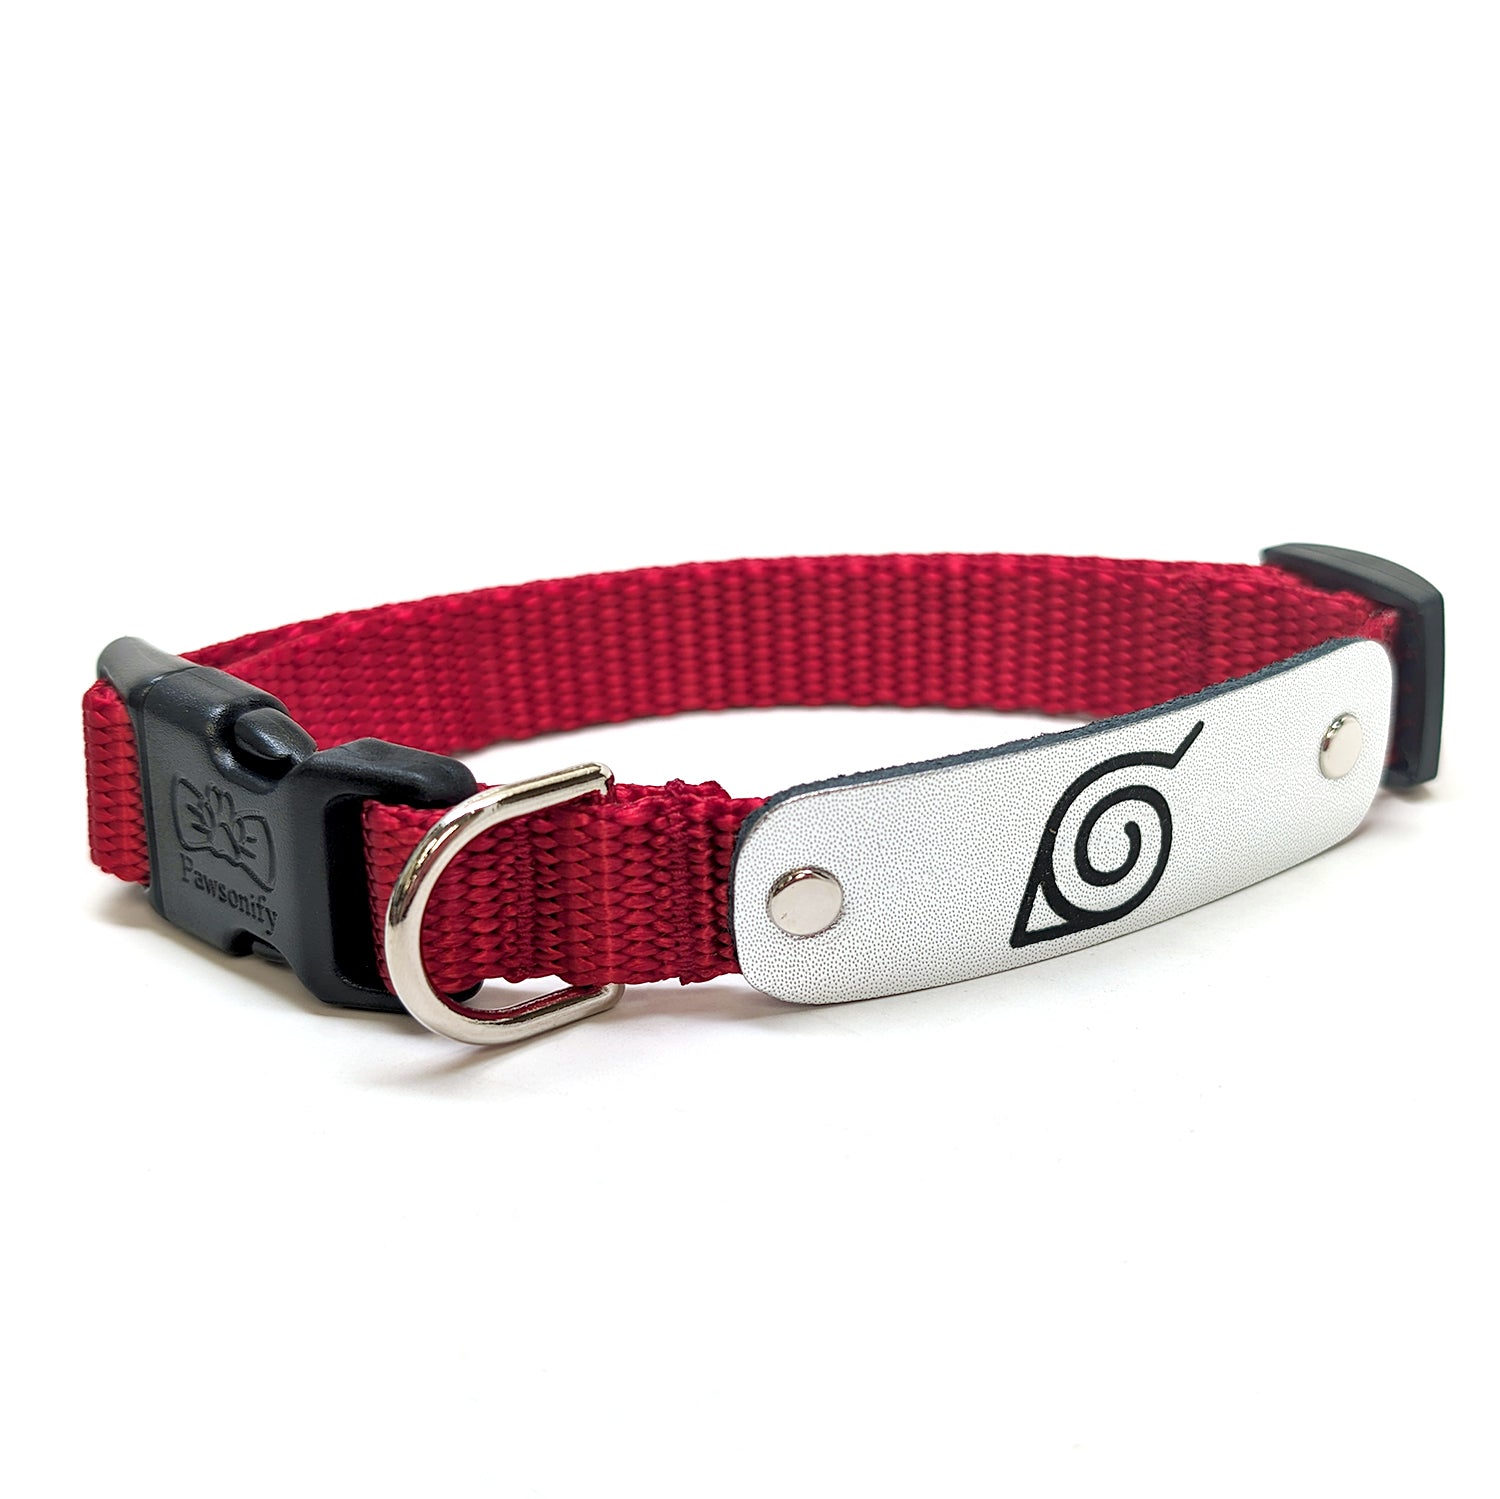 Naruto Shippuden x Pawsonify - Officially Licensed Ninja Collar (Red) for Small Dogs #size_Dog: (S) 11-15